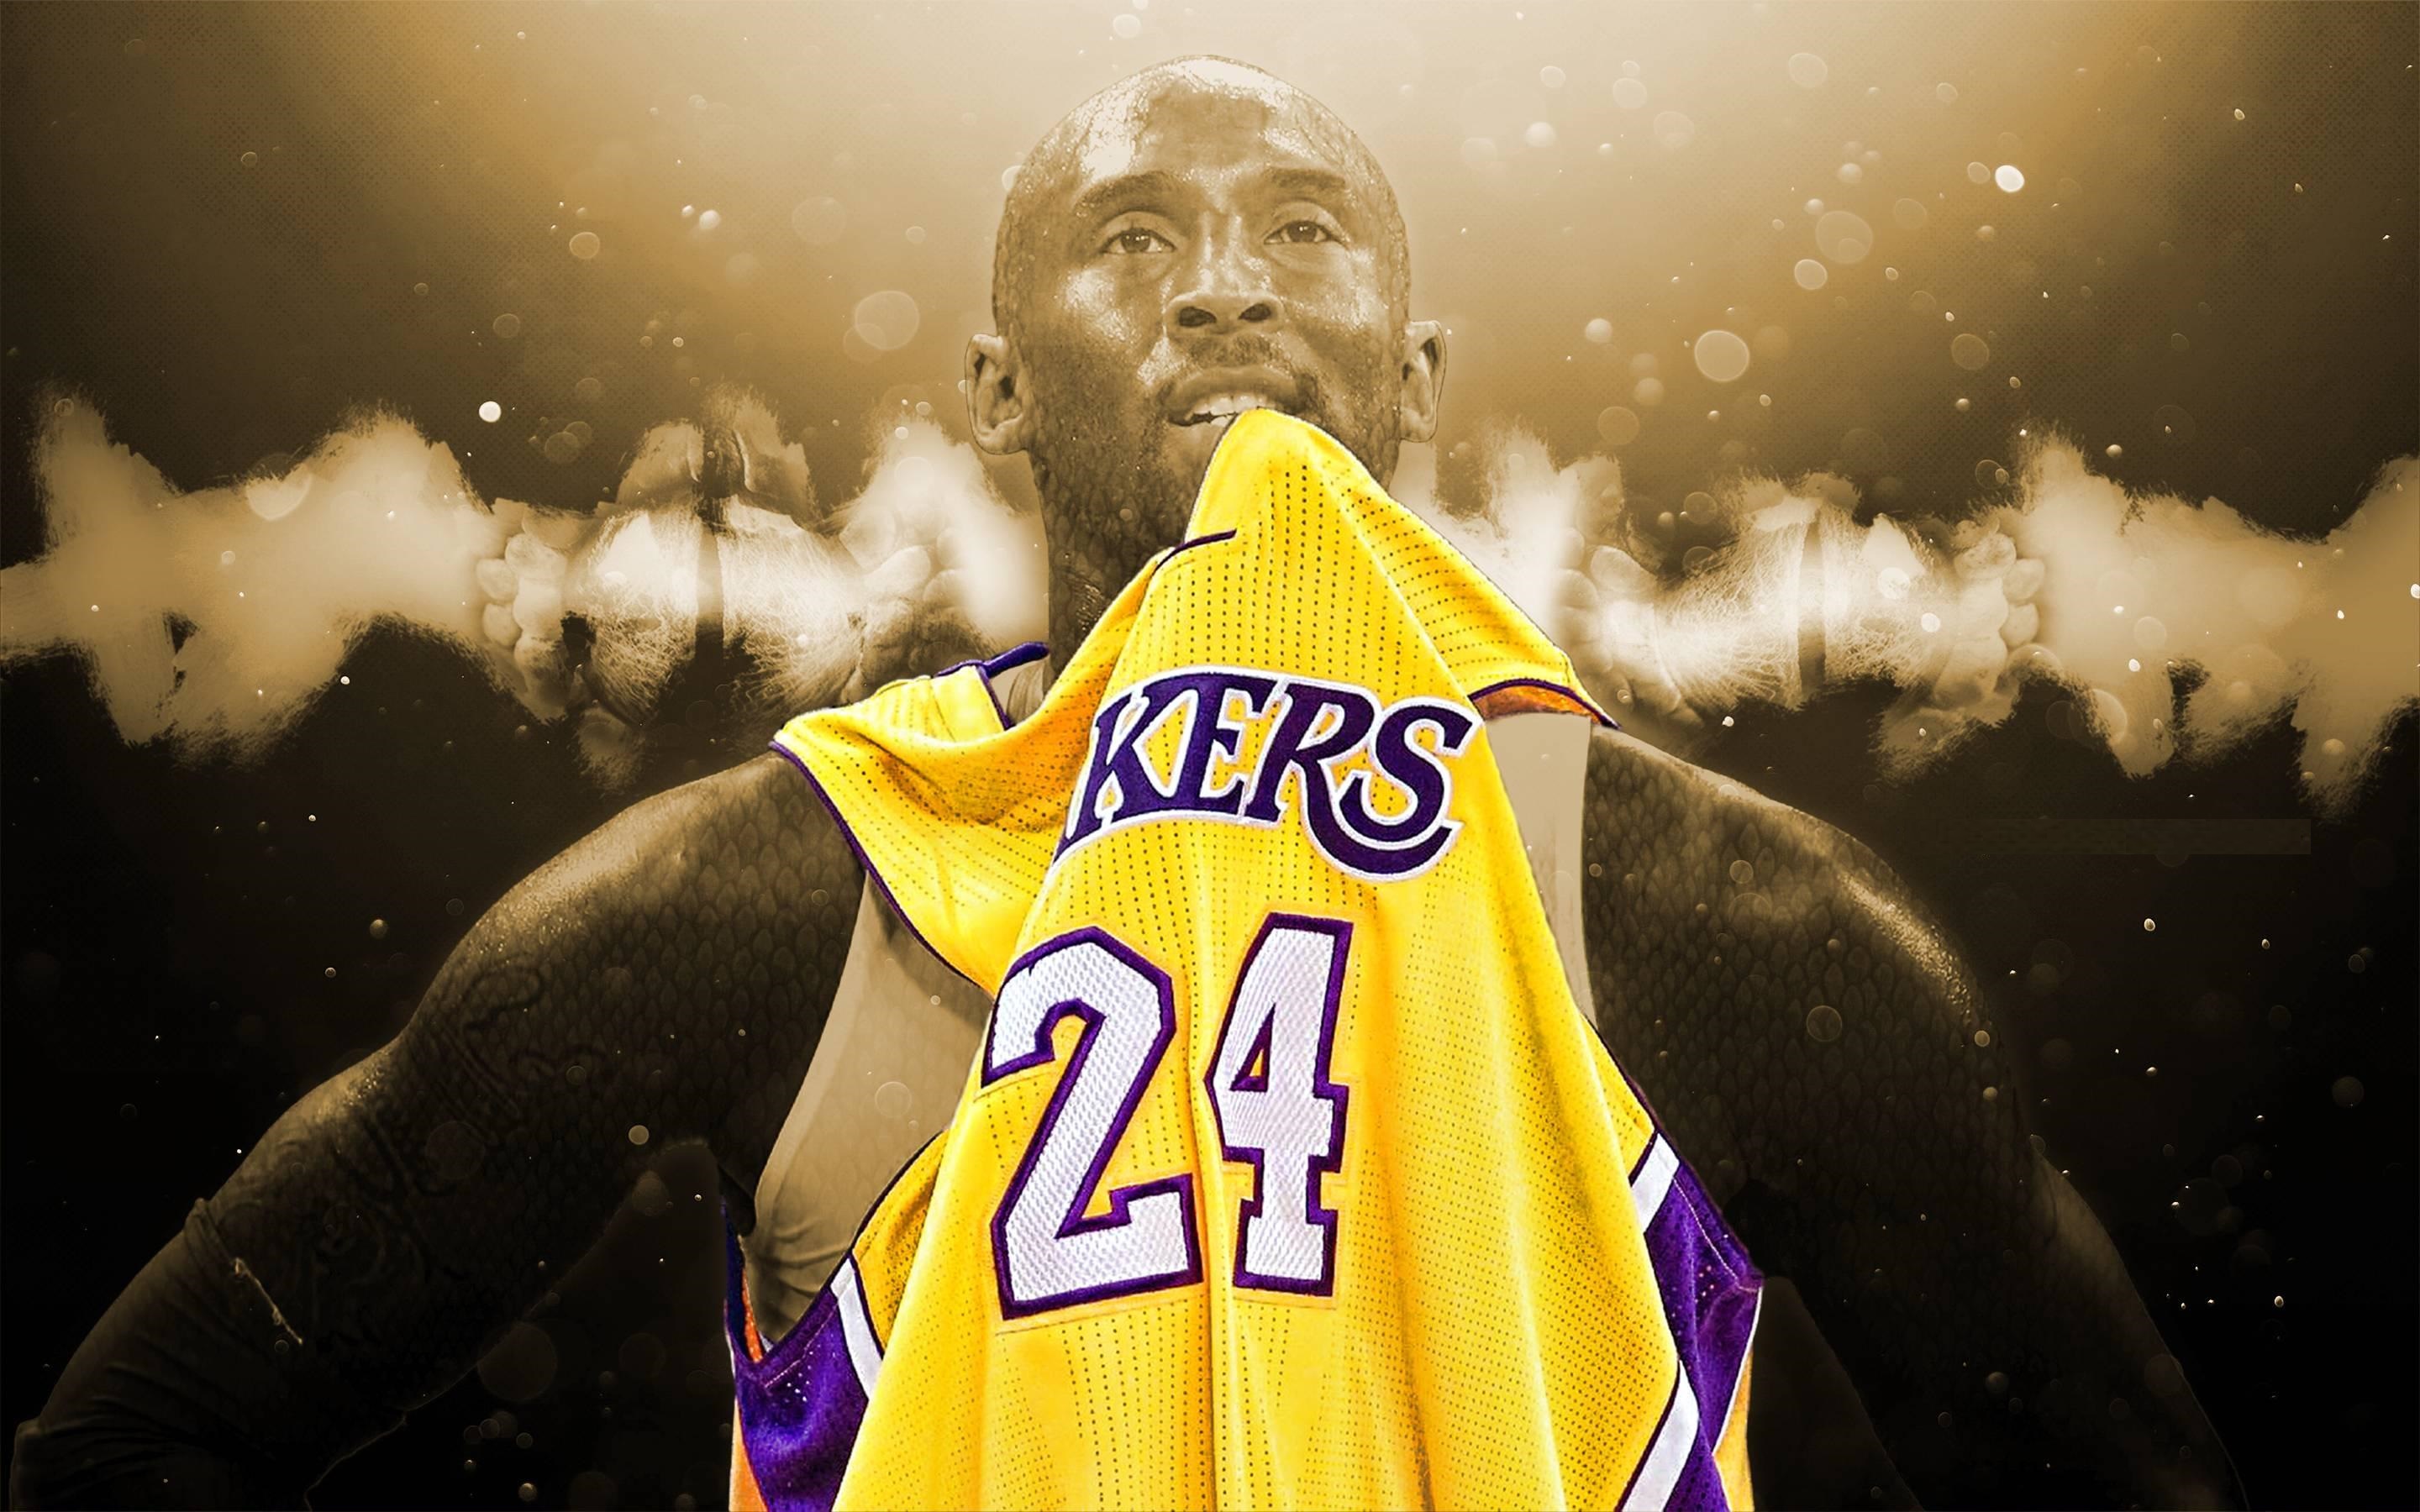 New Collection Of The Los Angeles Lakers Wallpapers - Kobe Bryant - HD Wallpaper 